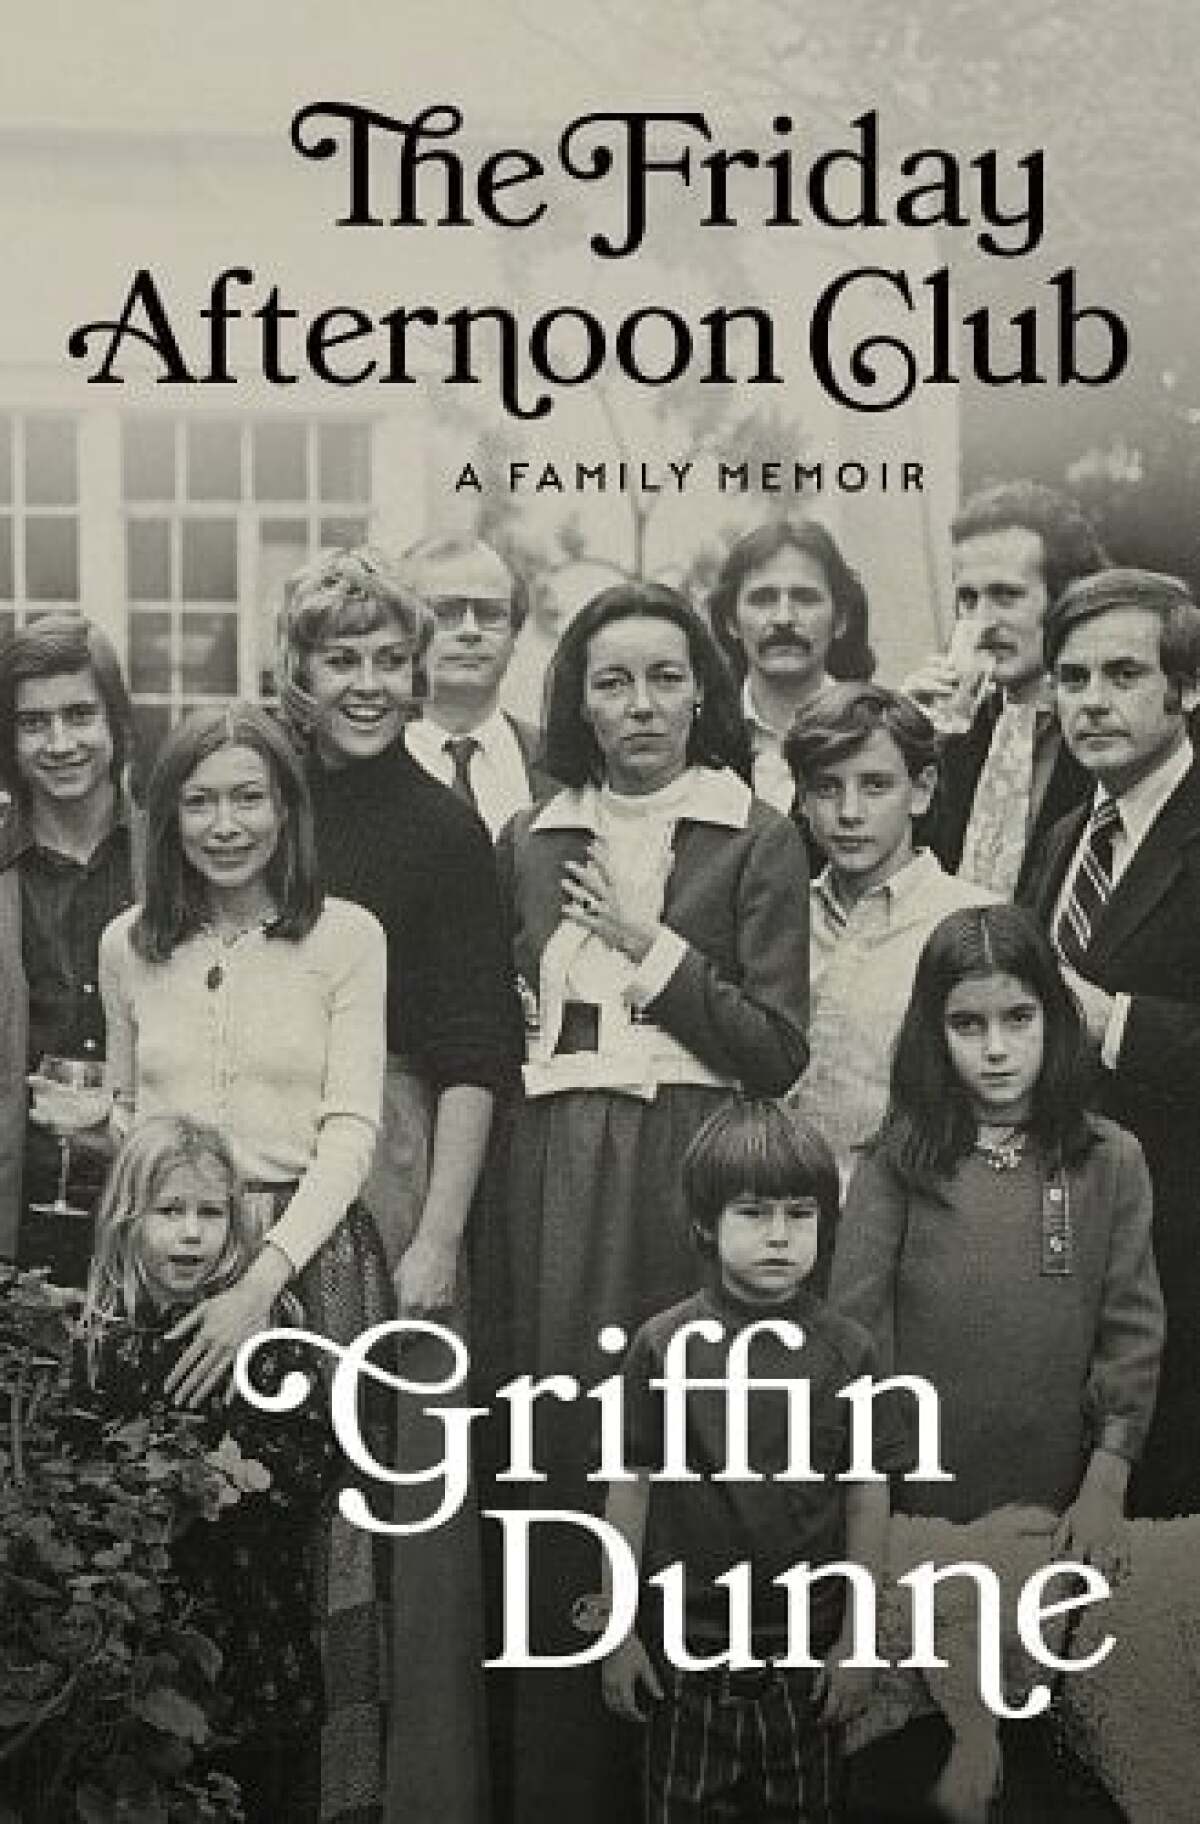 The cover of "The Friday Afternoon Club"